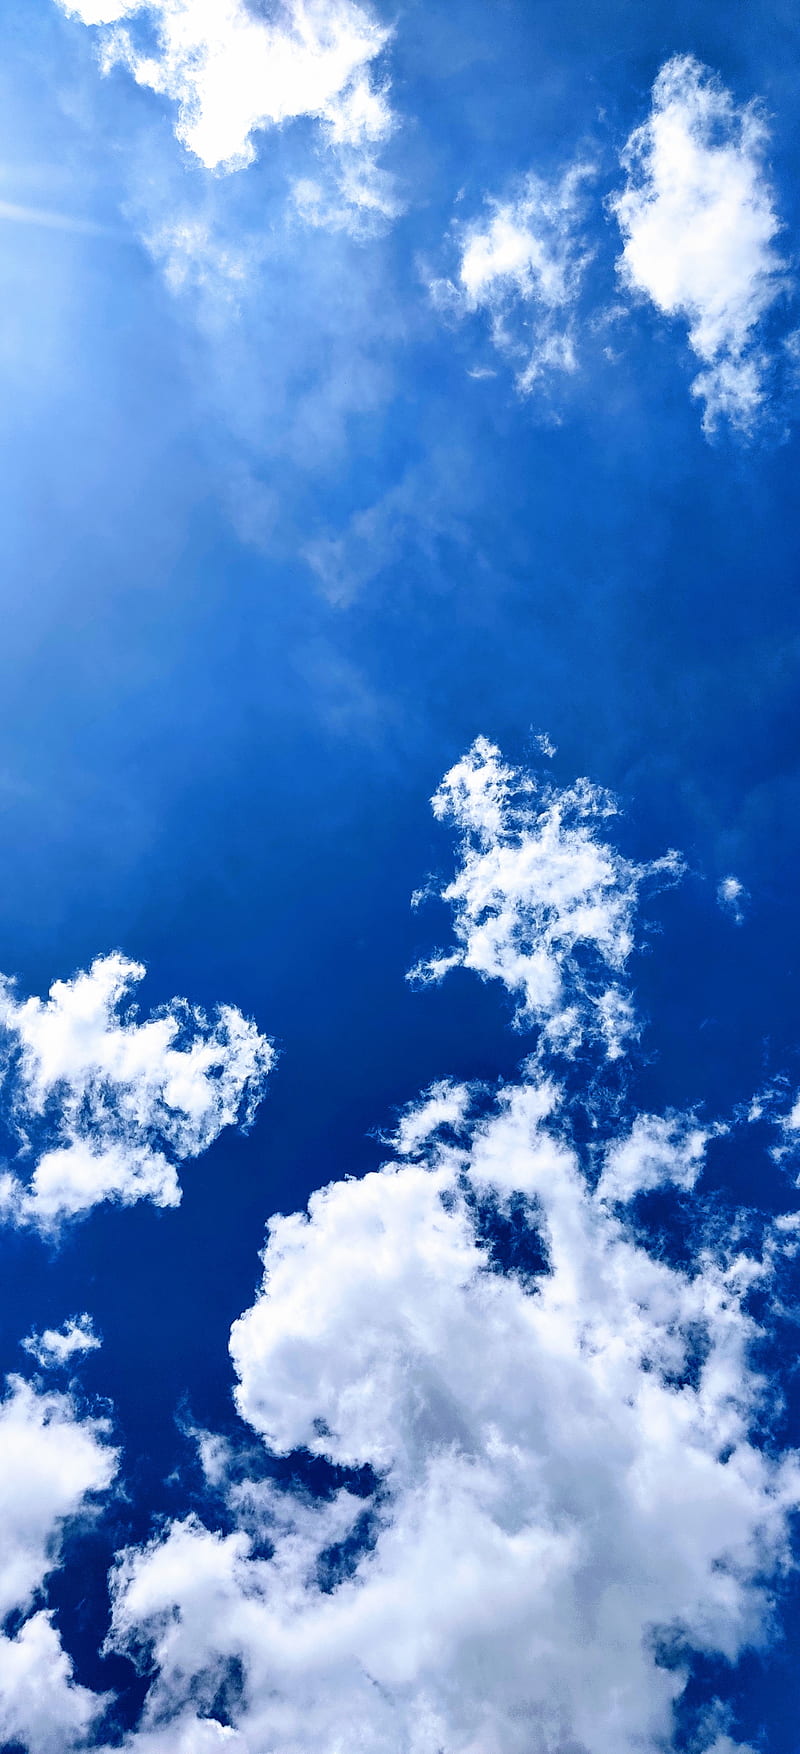 white clouds and blue sky during daytime iPhone 11 Wallpapers Free Download